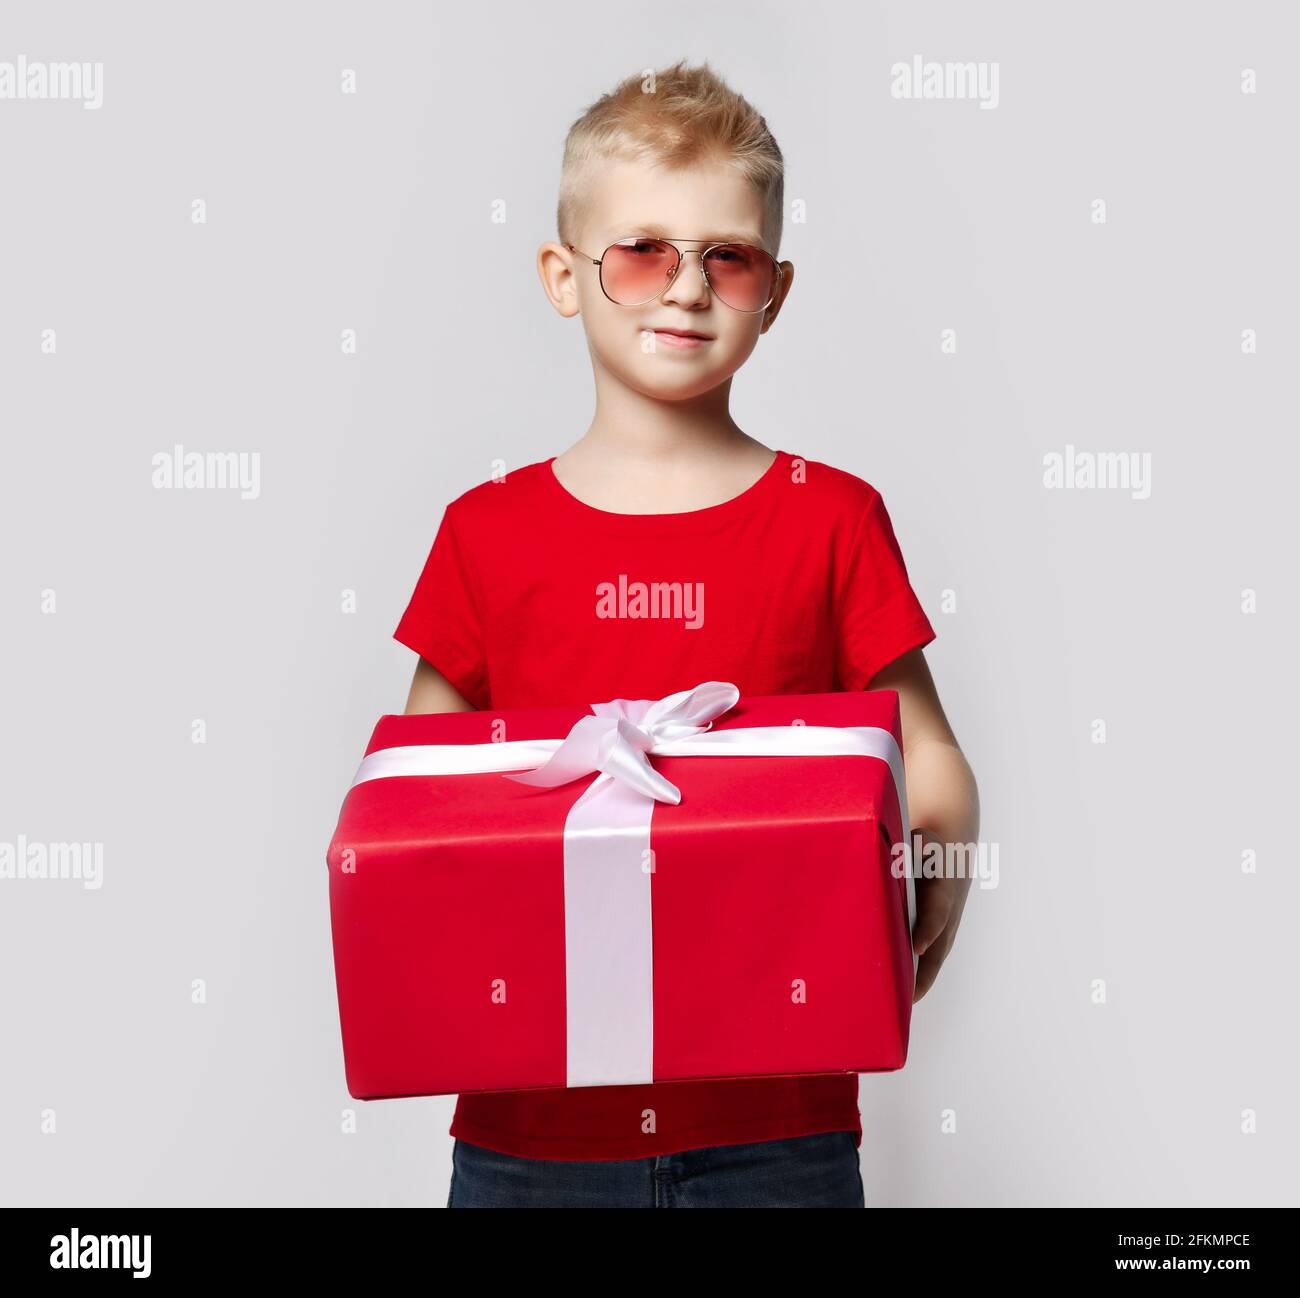 Stylish kid boy in red t-shirt and sunglasses stands holding big present for birthday gift box with ribbon in hands Stock Photo